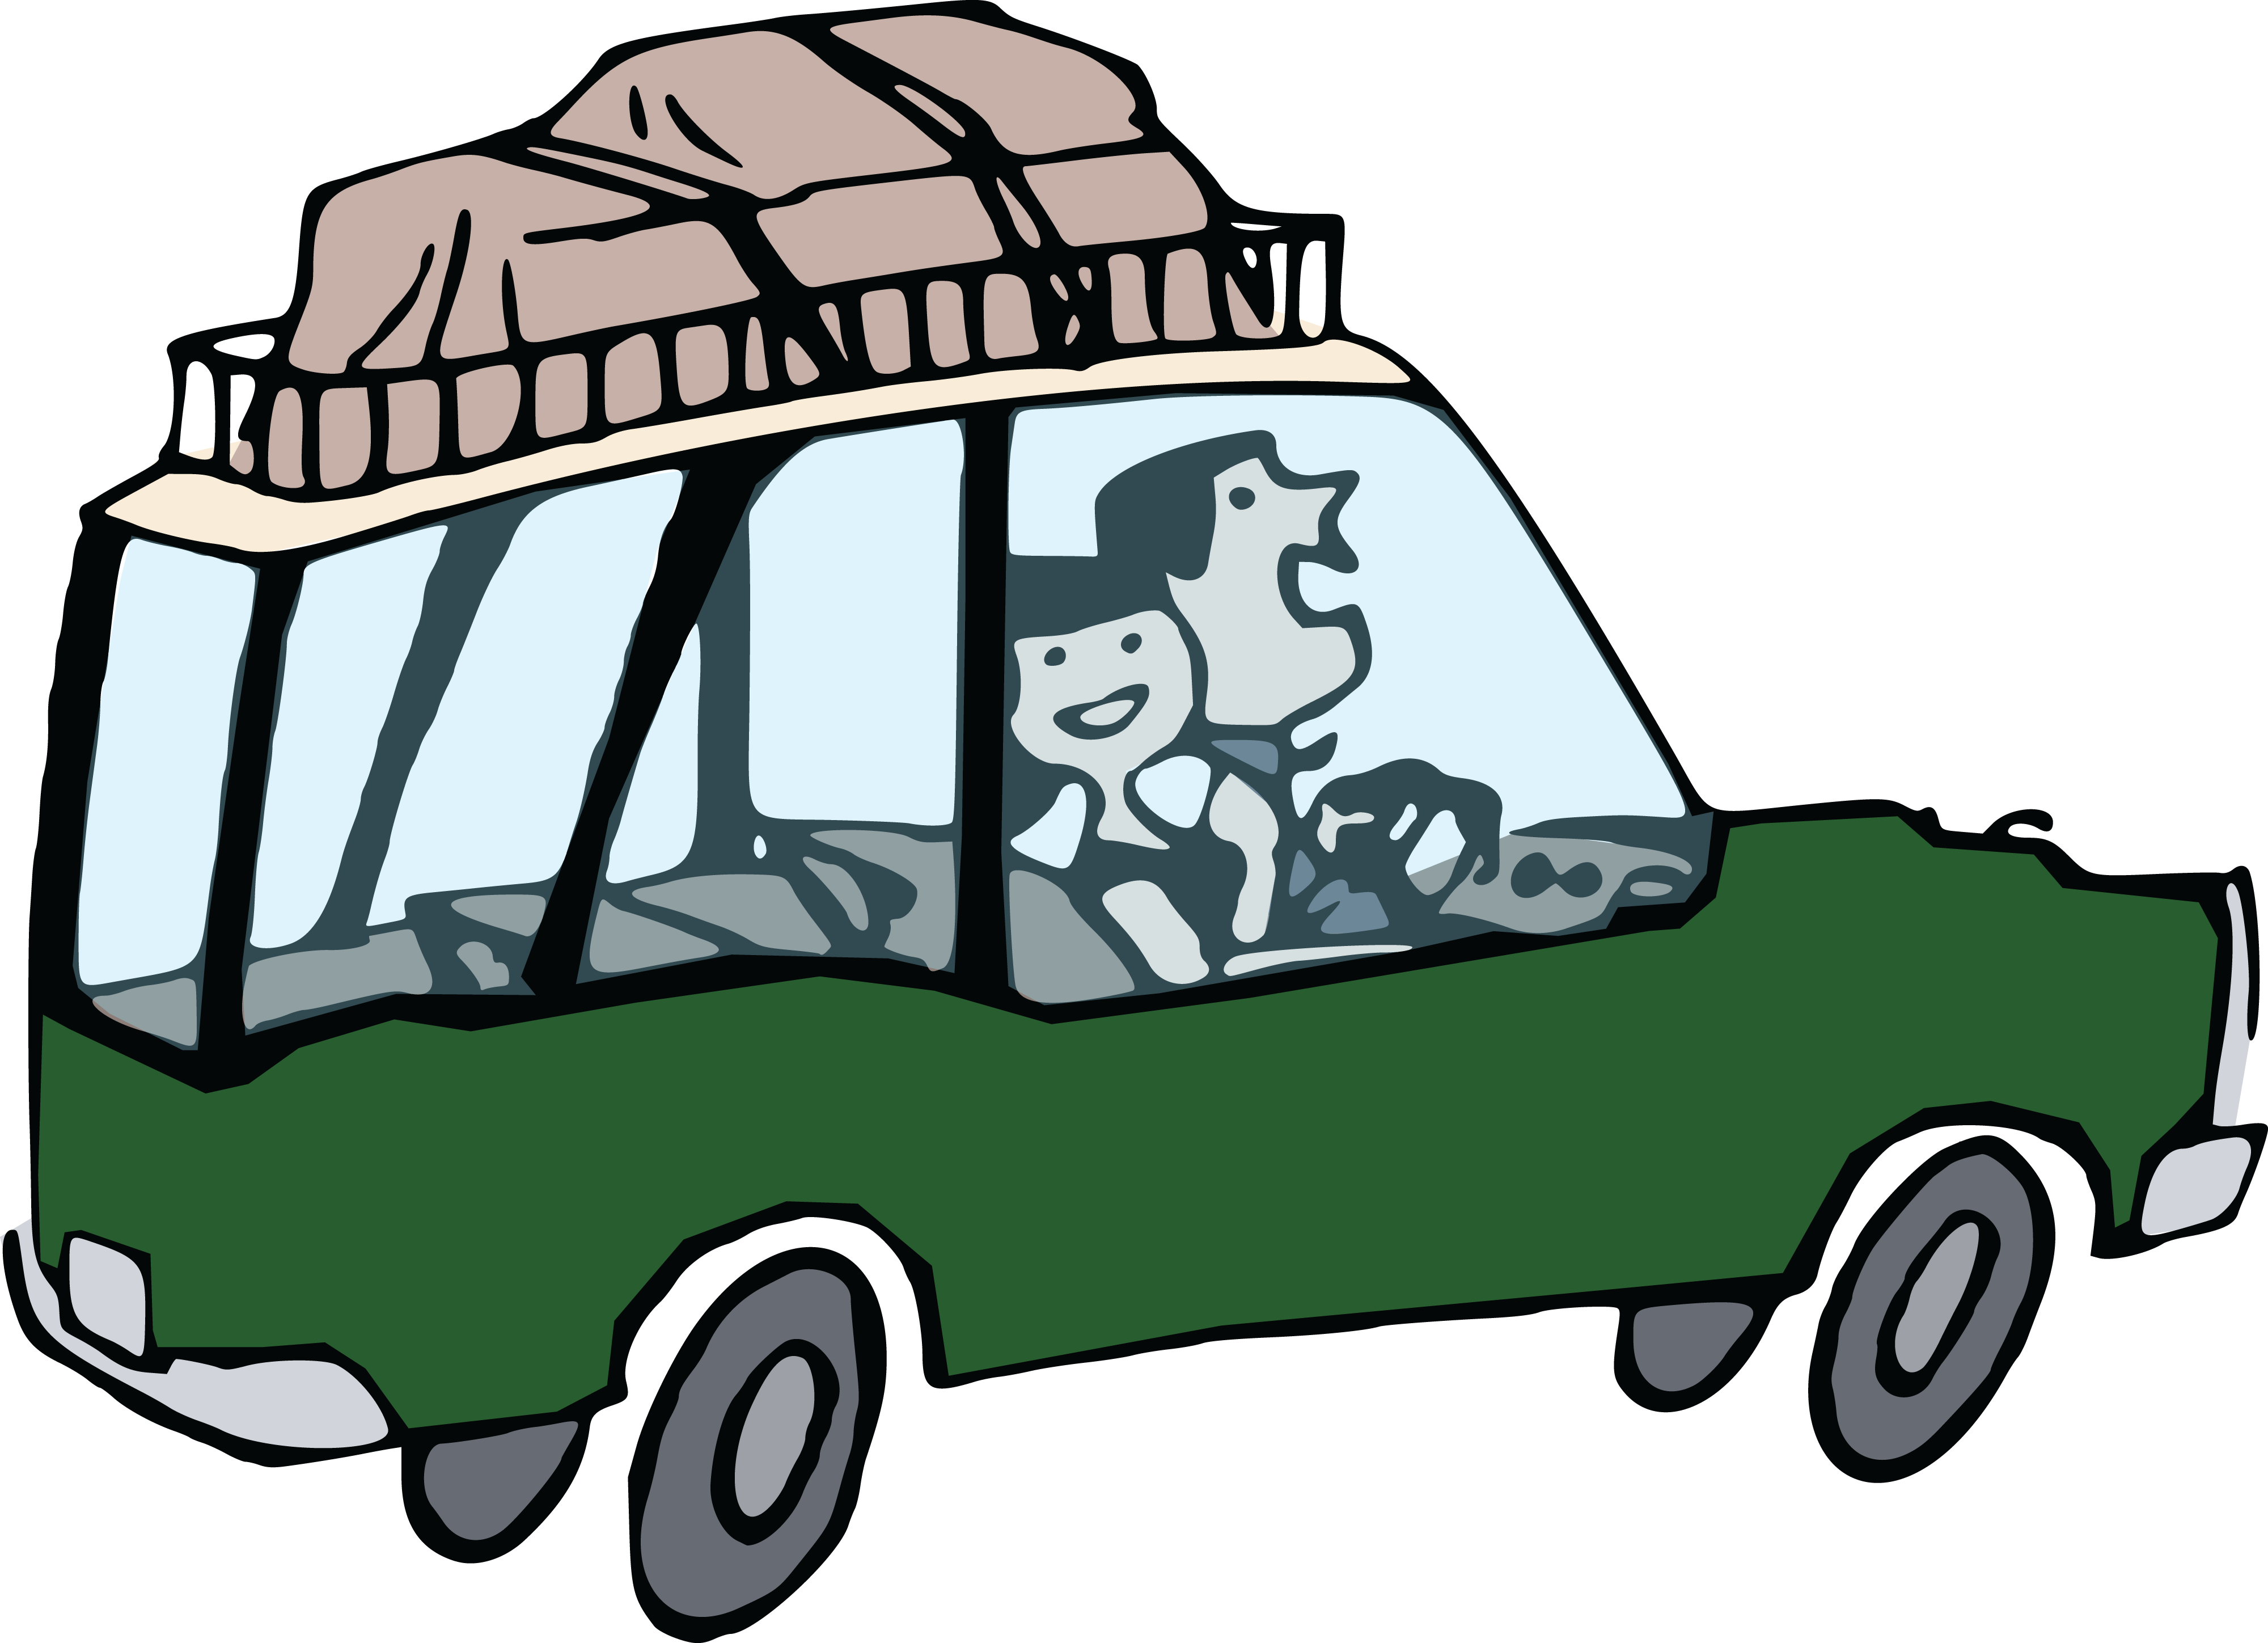 Download Free Clipart Of A couple on a road trip